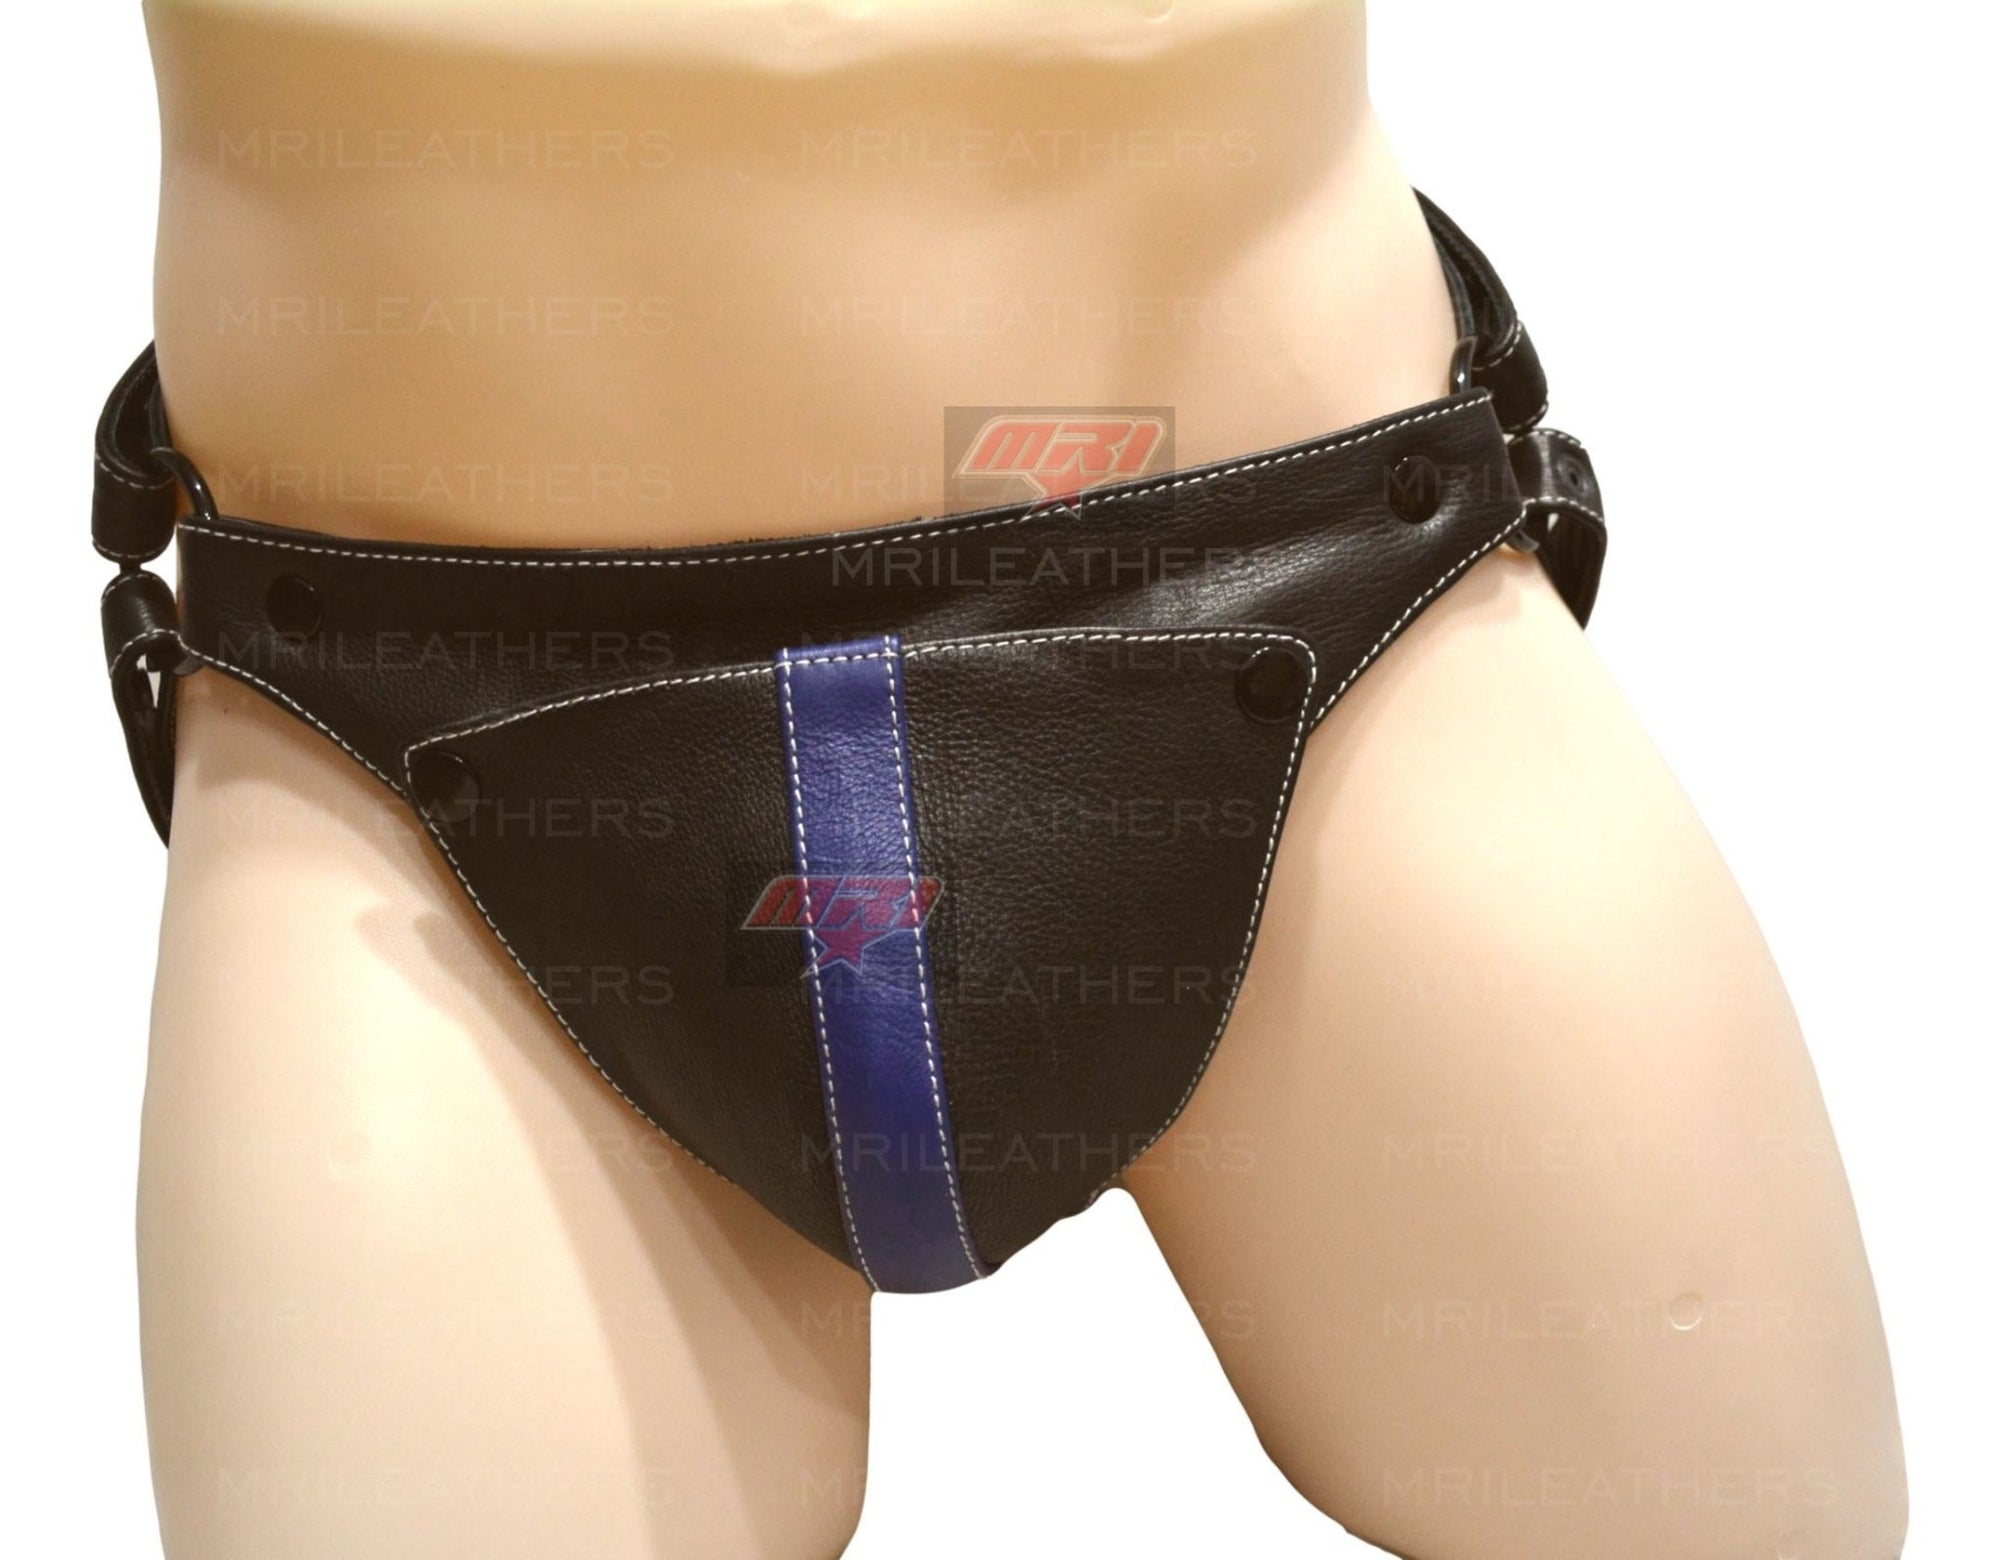 Men Leather thong- removable pouch - MRI Leathers